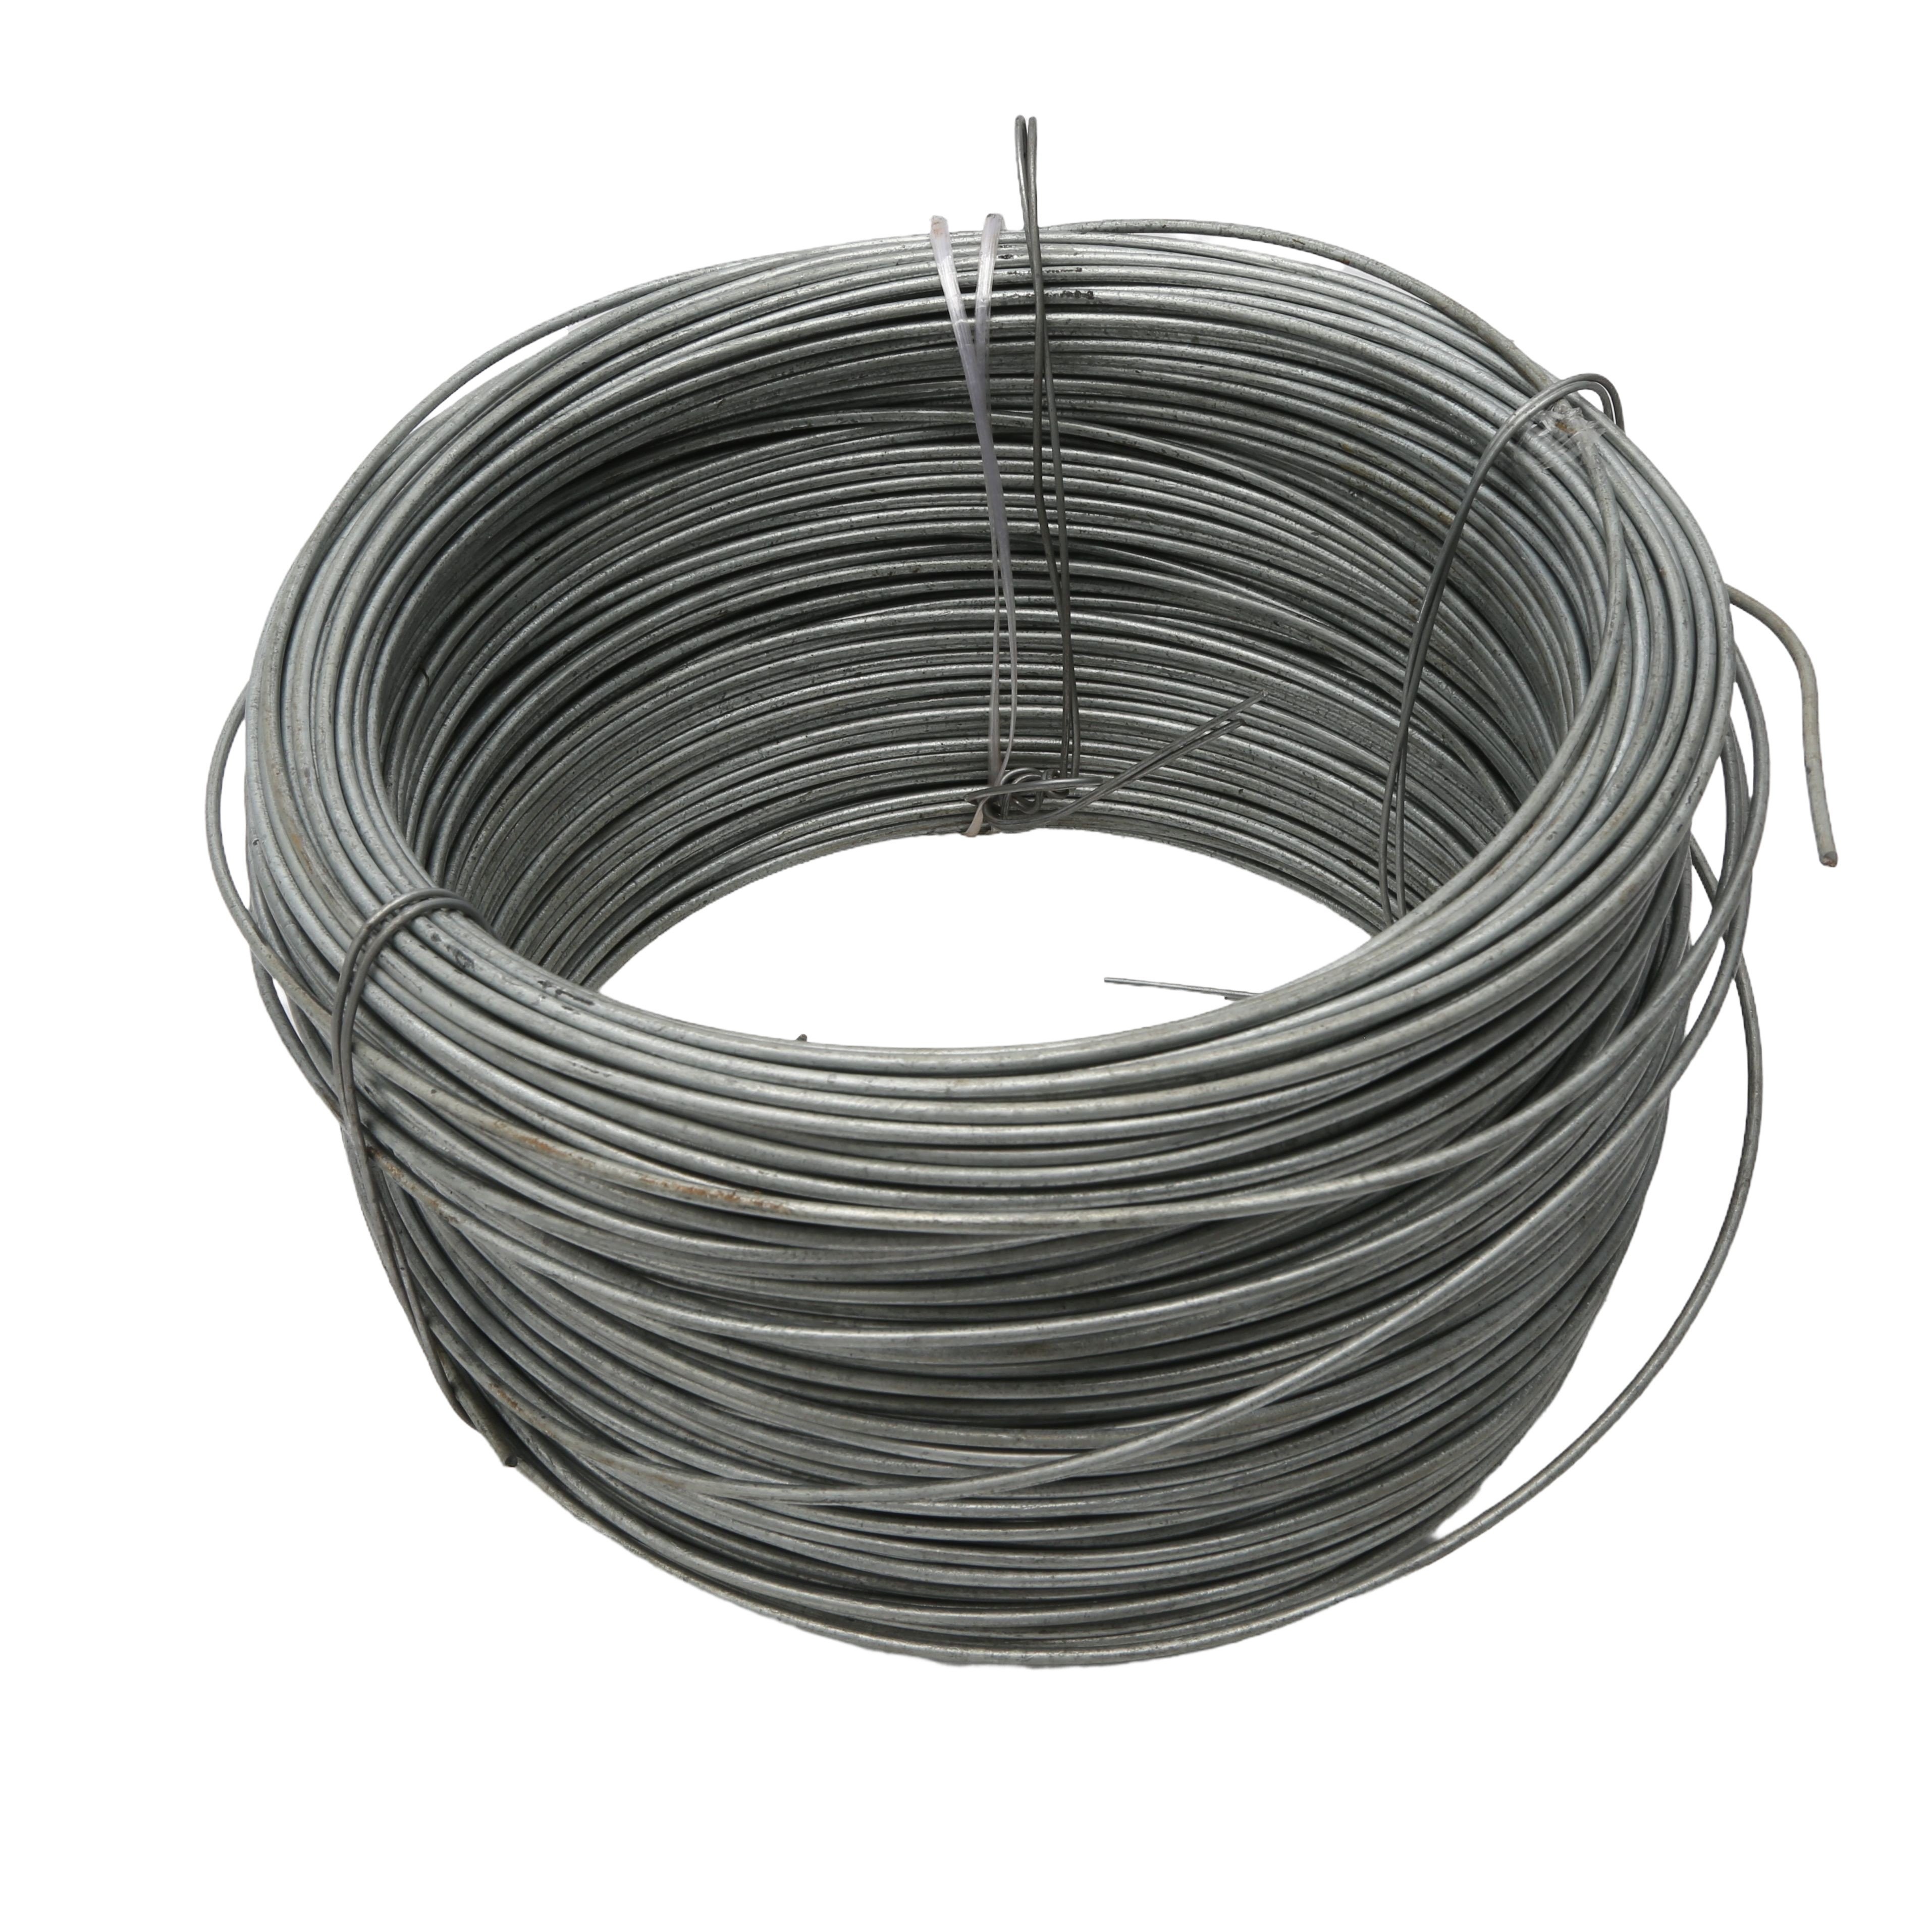 Chain Link Fence Black Utility Tension Wire [6 Gauge] (Vinyl Coated Steel  Utility Wire) - 400' Long, 40 lbs.